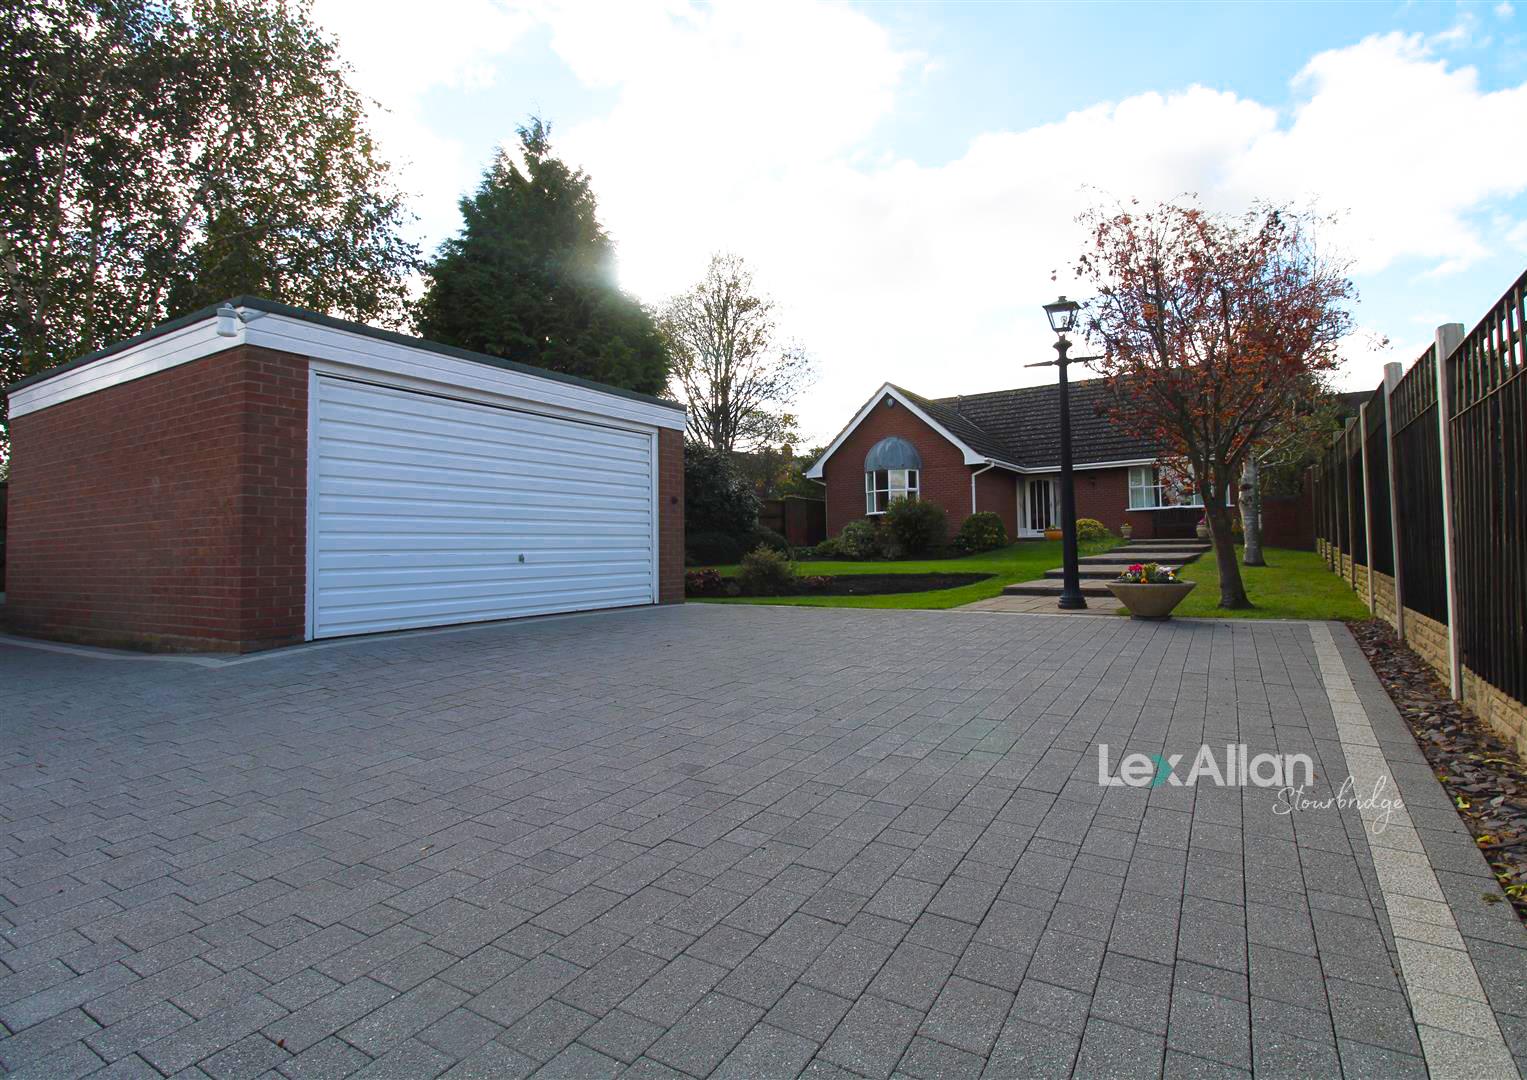 3 bed detached bungalow for sale in Wood Street, Stourbridge, DY8 